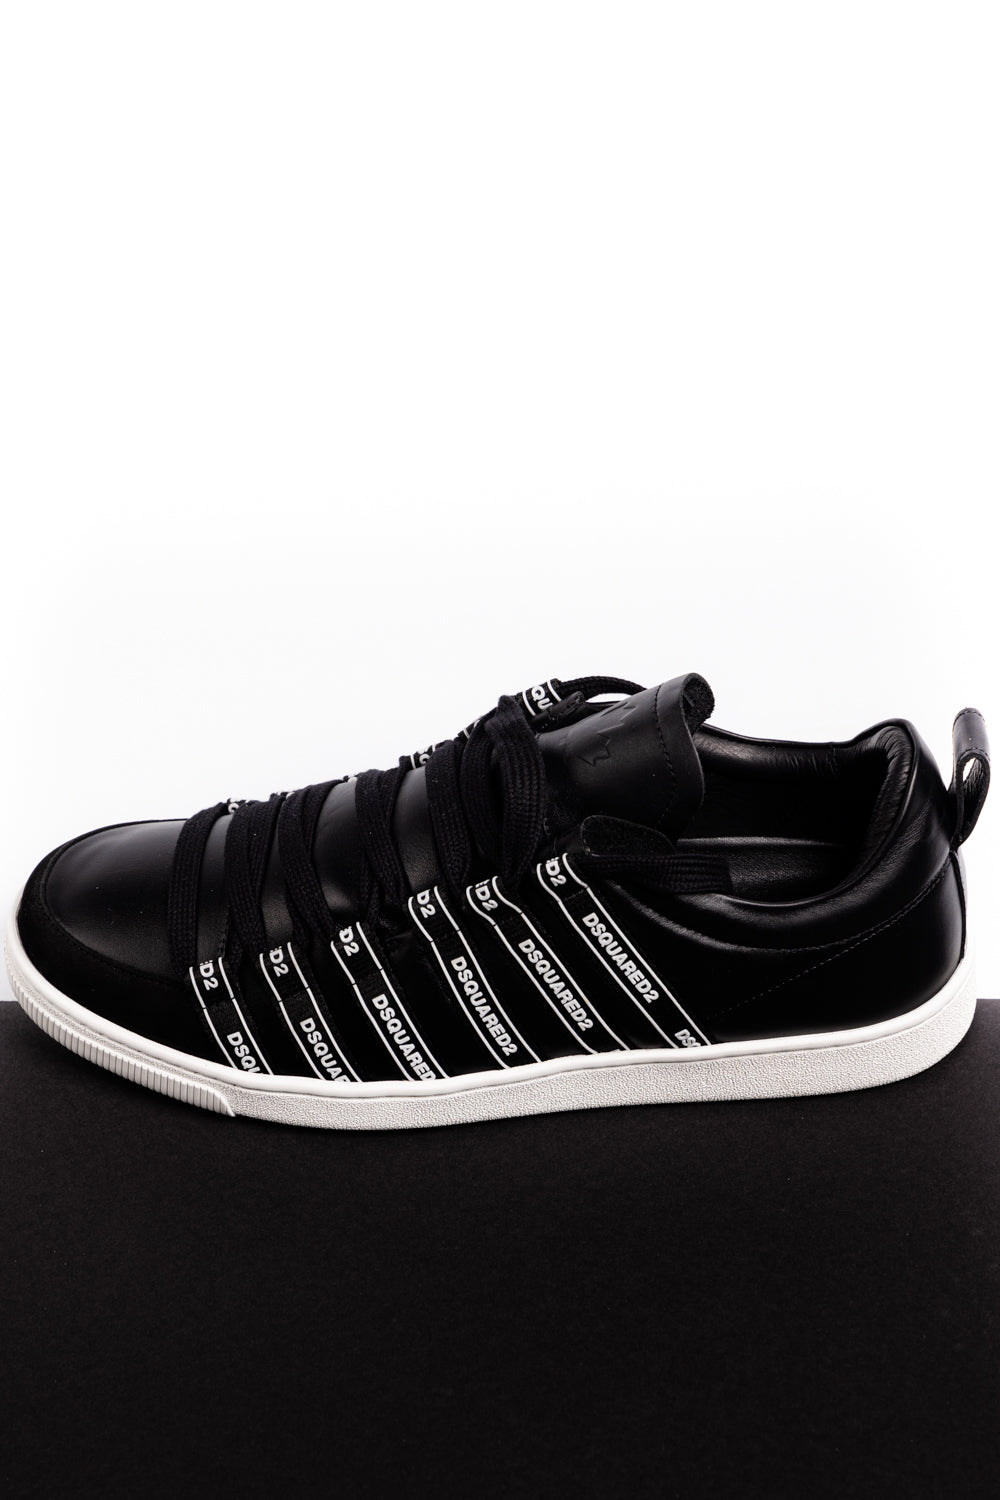 Dsquared2 Logo Stripe Sneakers - Brands Off - Buy Online Luxury Clothing - Fashion Online Shop - Outlet Price